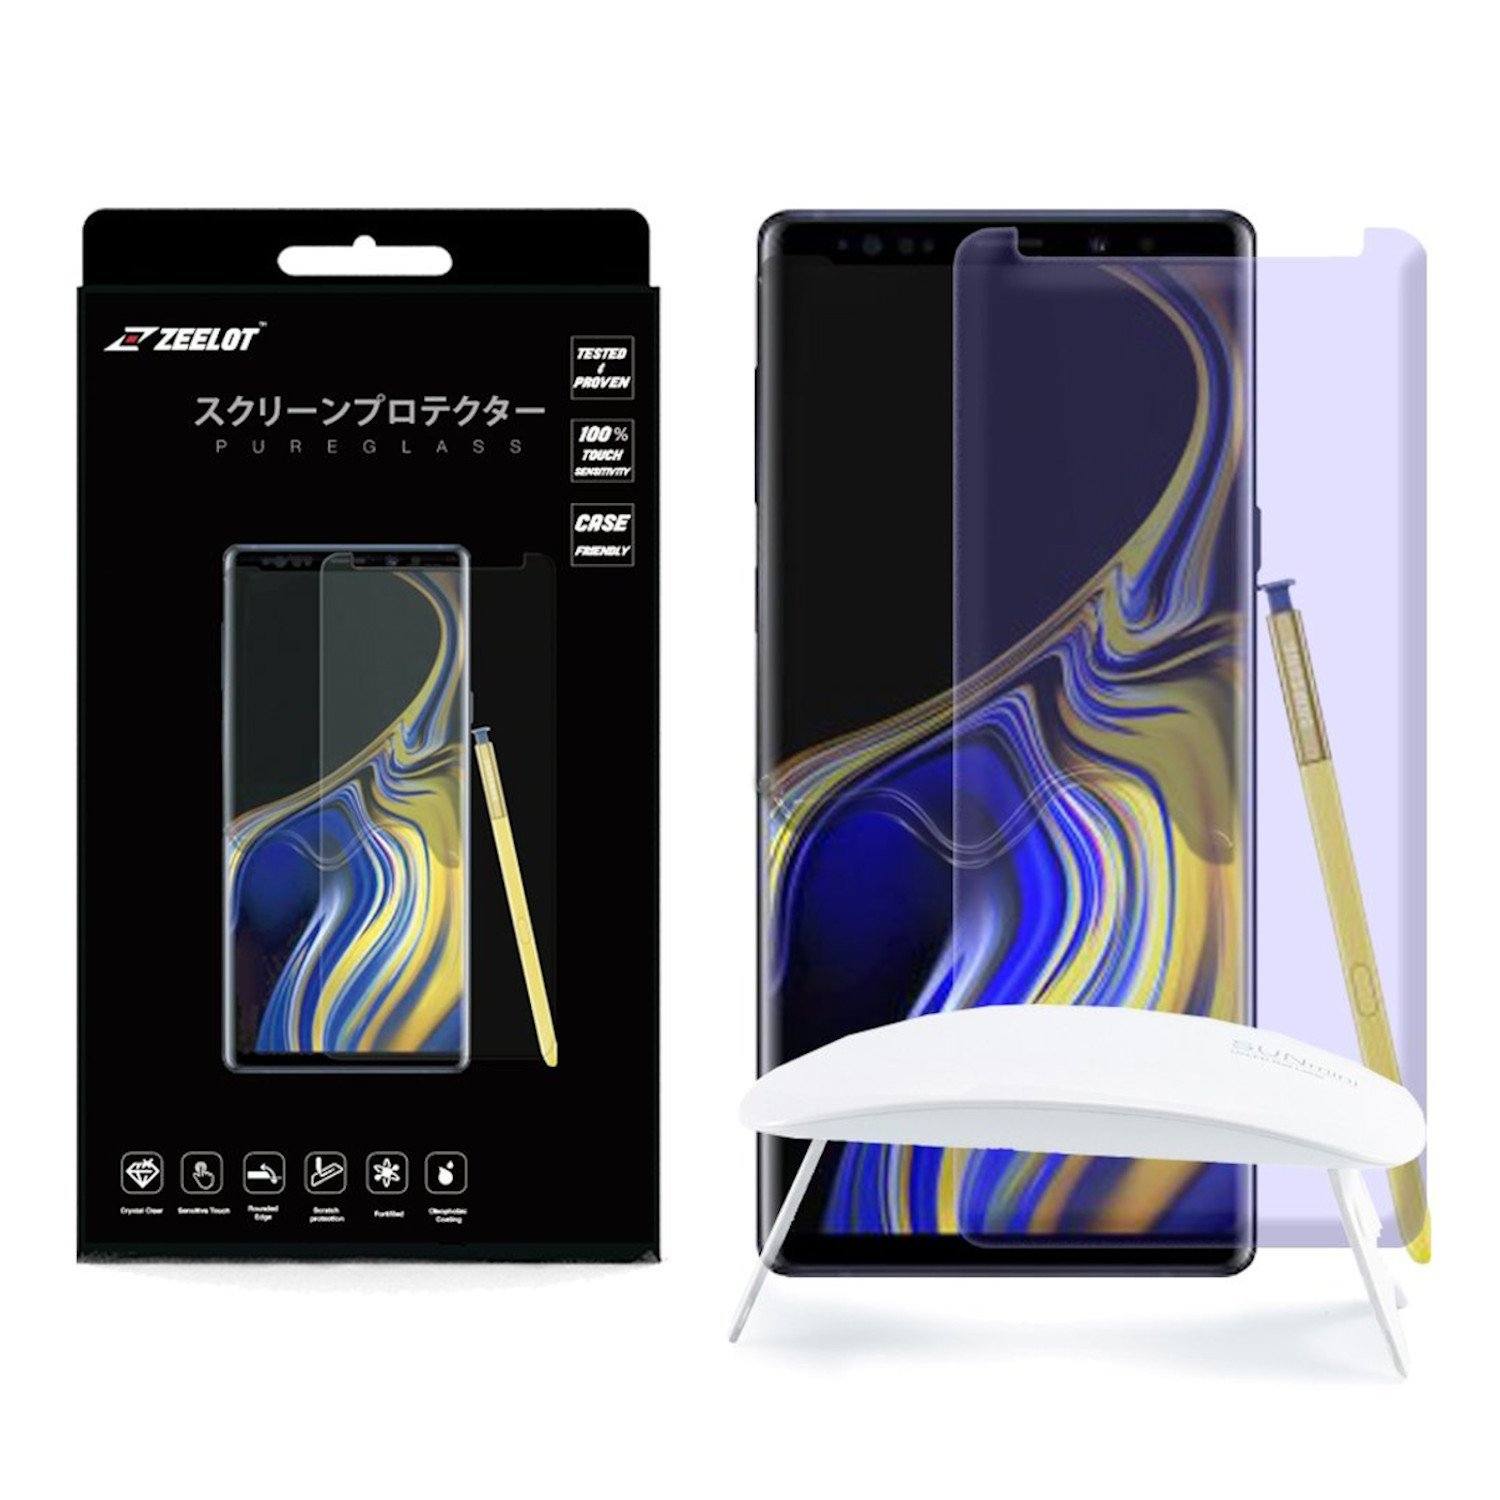 ZEELOT PureGlass 3D LOCA Tempered Glass Screen Protector for Samsung Galaxy Note 9/8, Anti Blue Ray LOCA Tempered Glass ZEELOT 